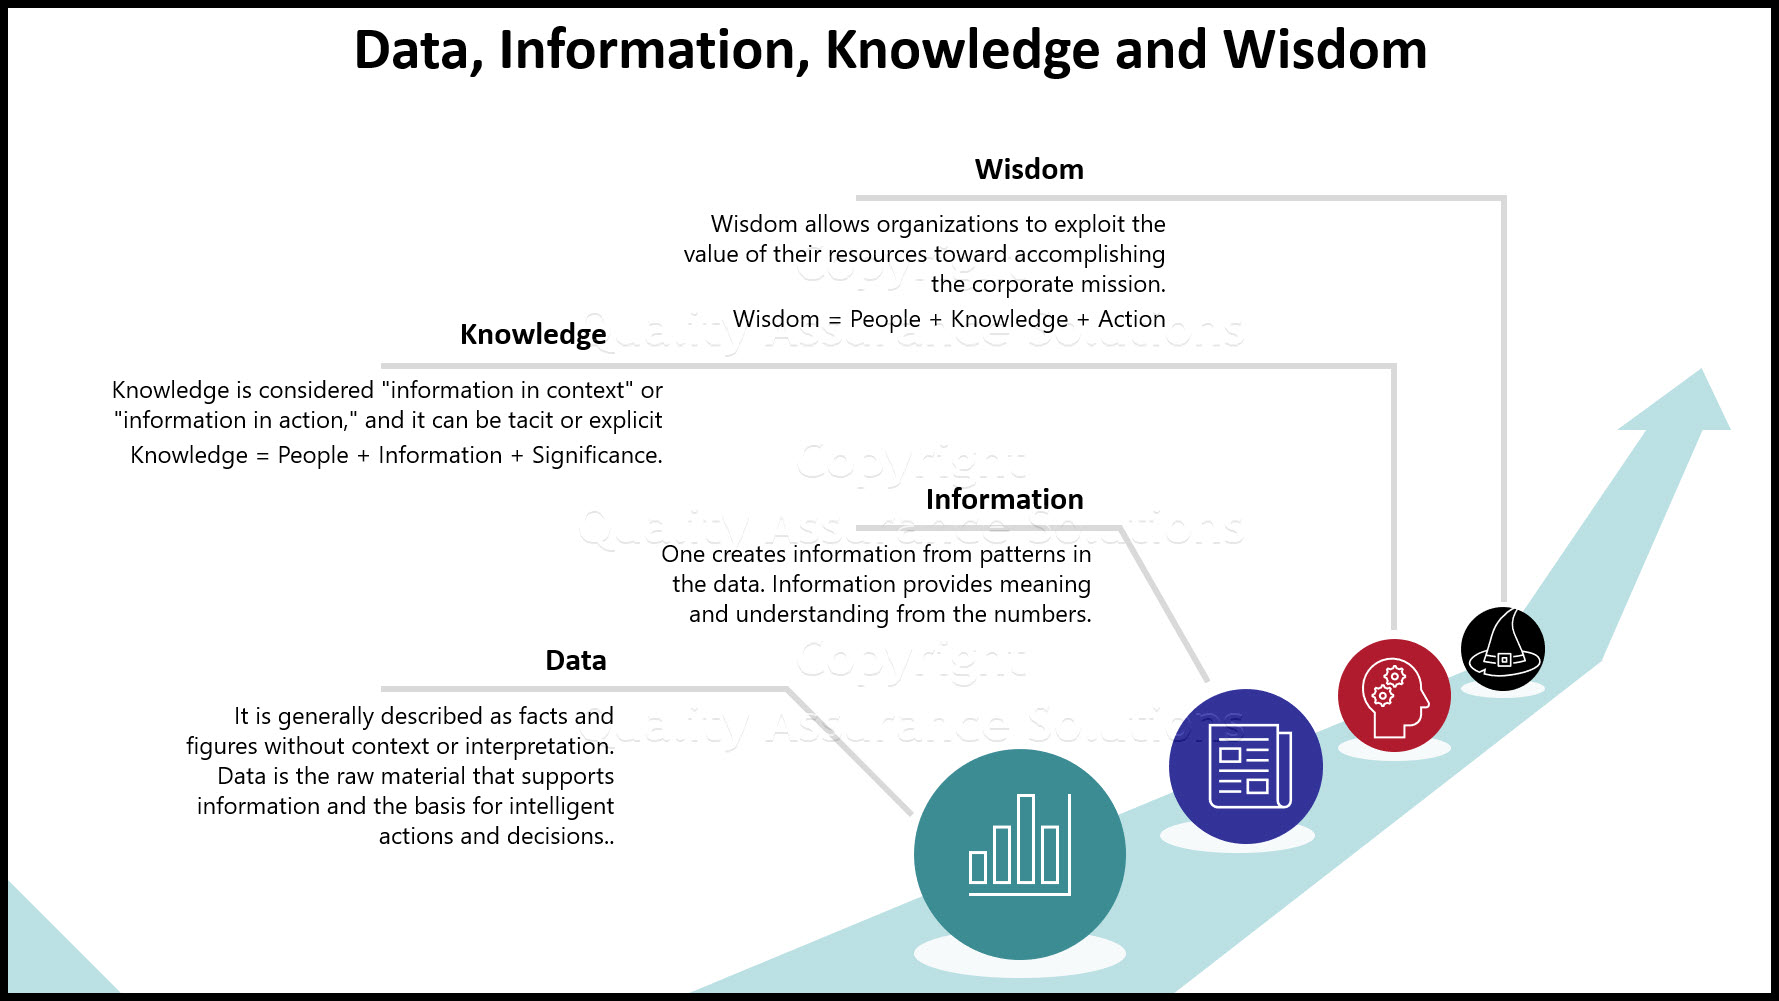 Data and Information, are often used interchangeably, they don’t mean the same thing